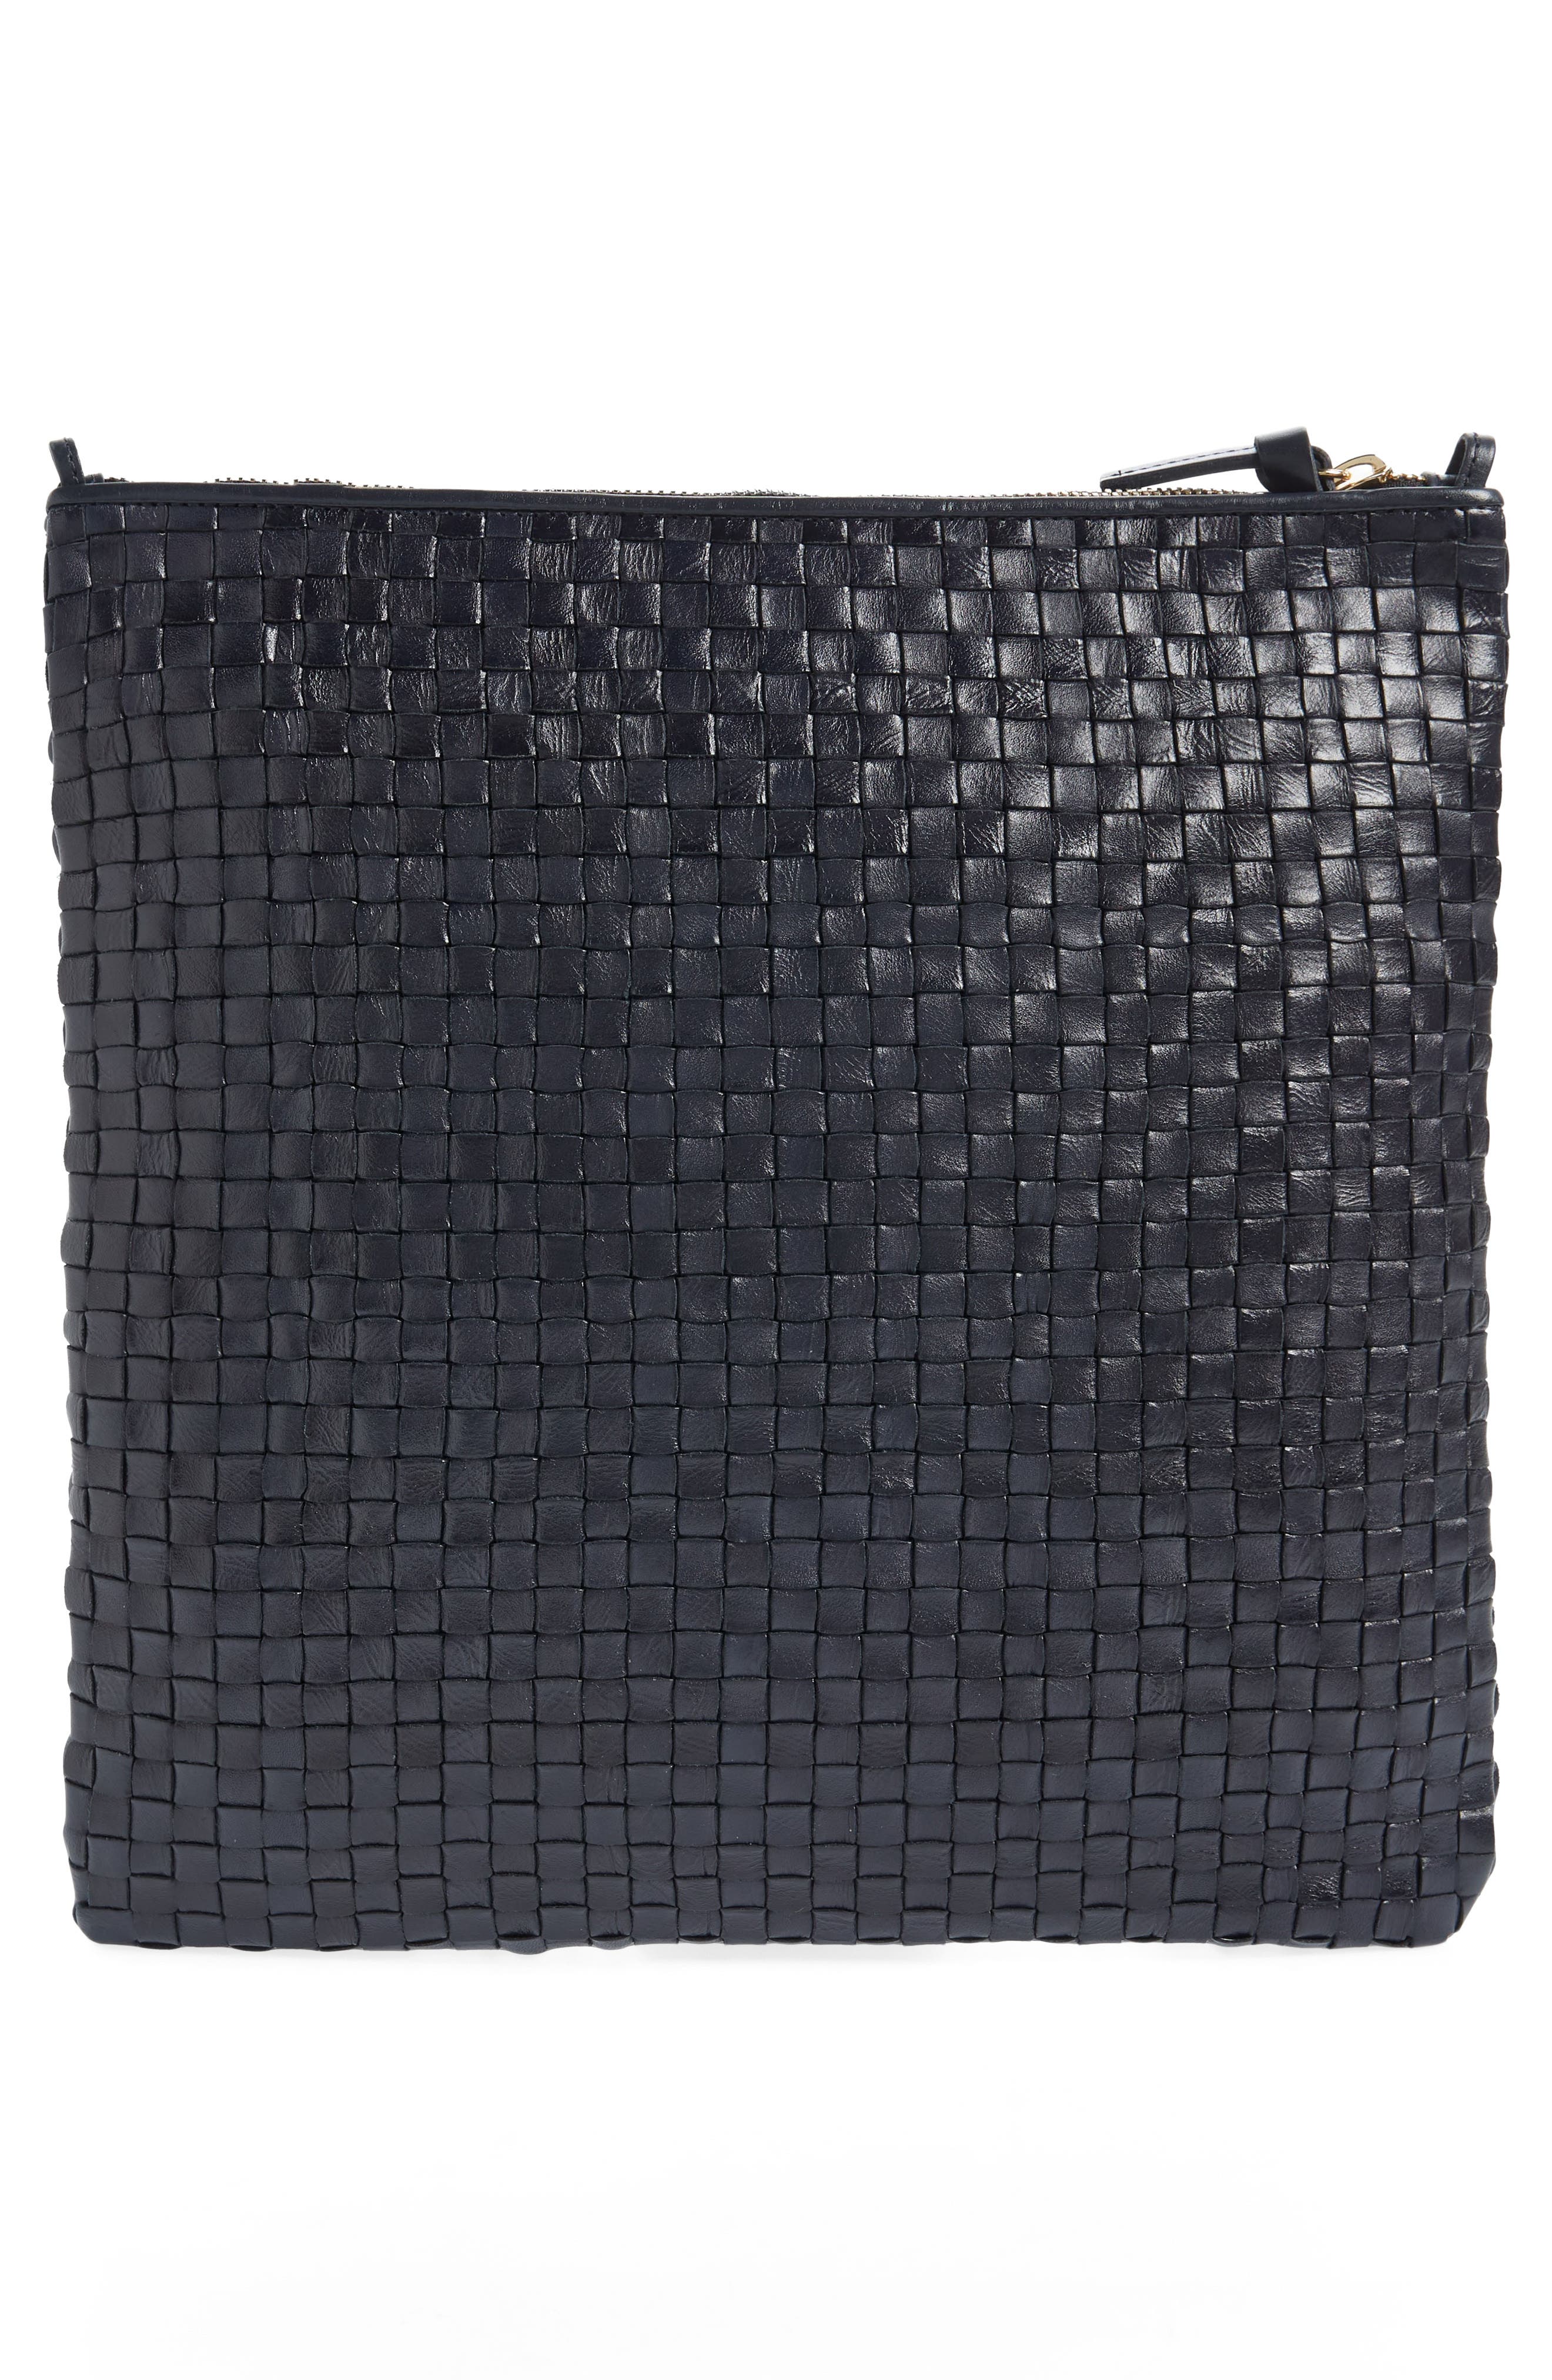 Clare V. Woven Leather Clutch with Tabs in Twilight Woven Checker